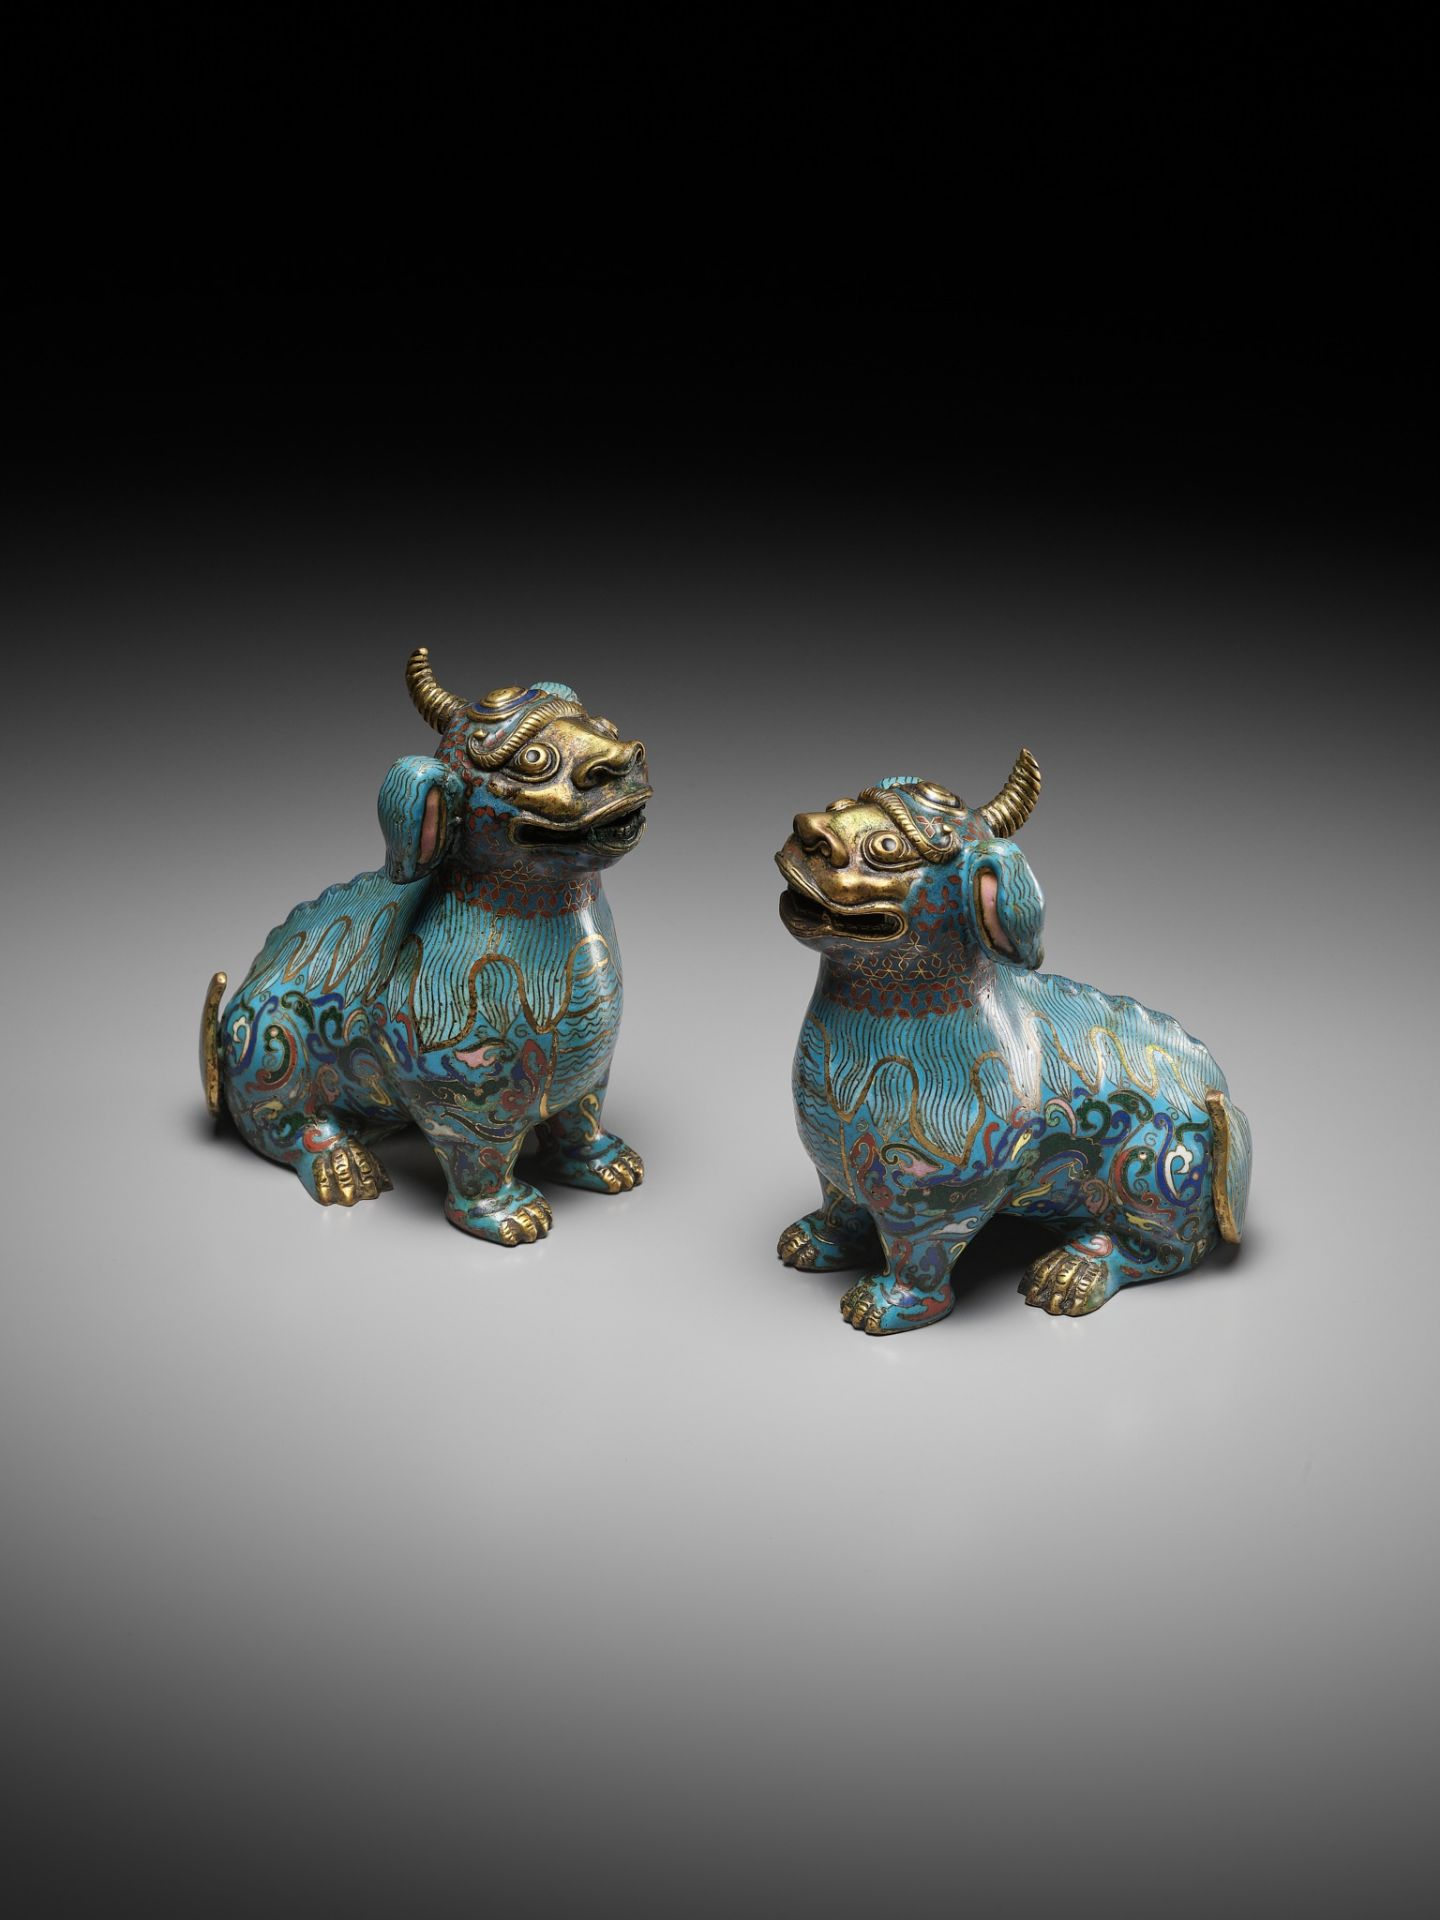 A PAIR OF GILT-BRONZE AND CLOISONNE ENAMEL LUDUAN, CHINA, 18TH - 19TH CENTURY - Image 2 of 11